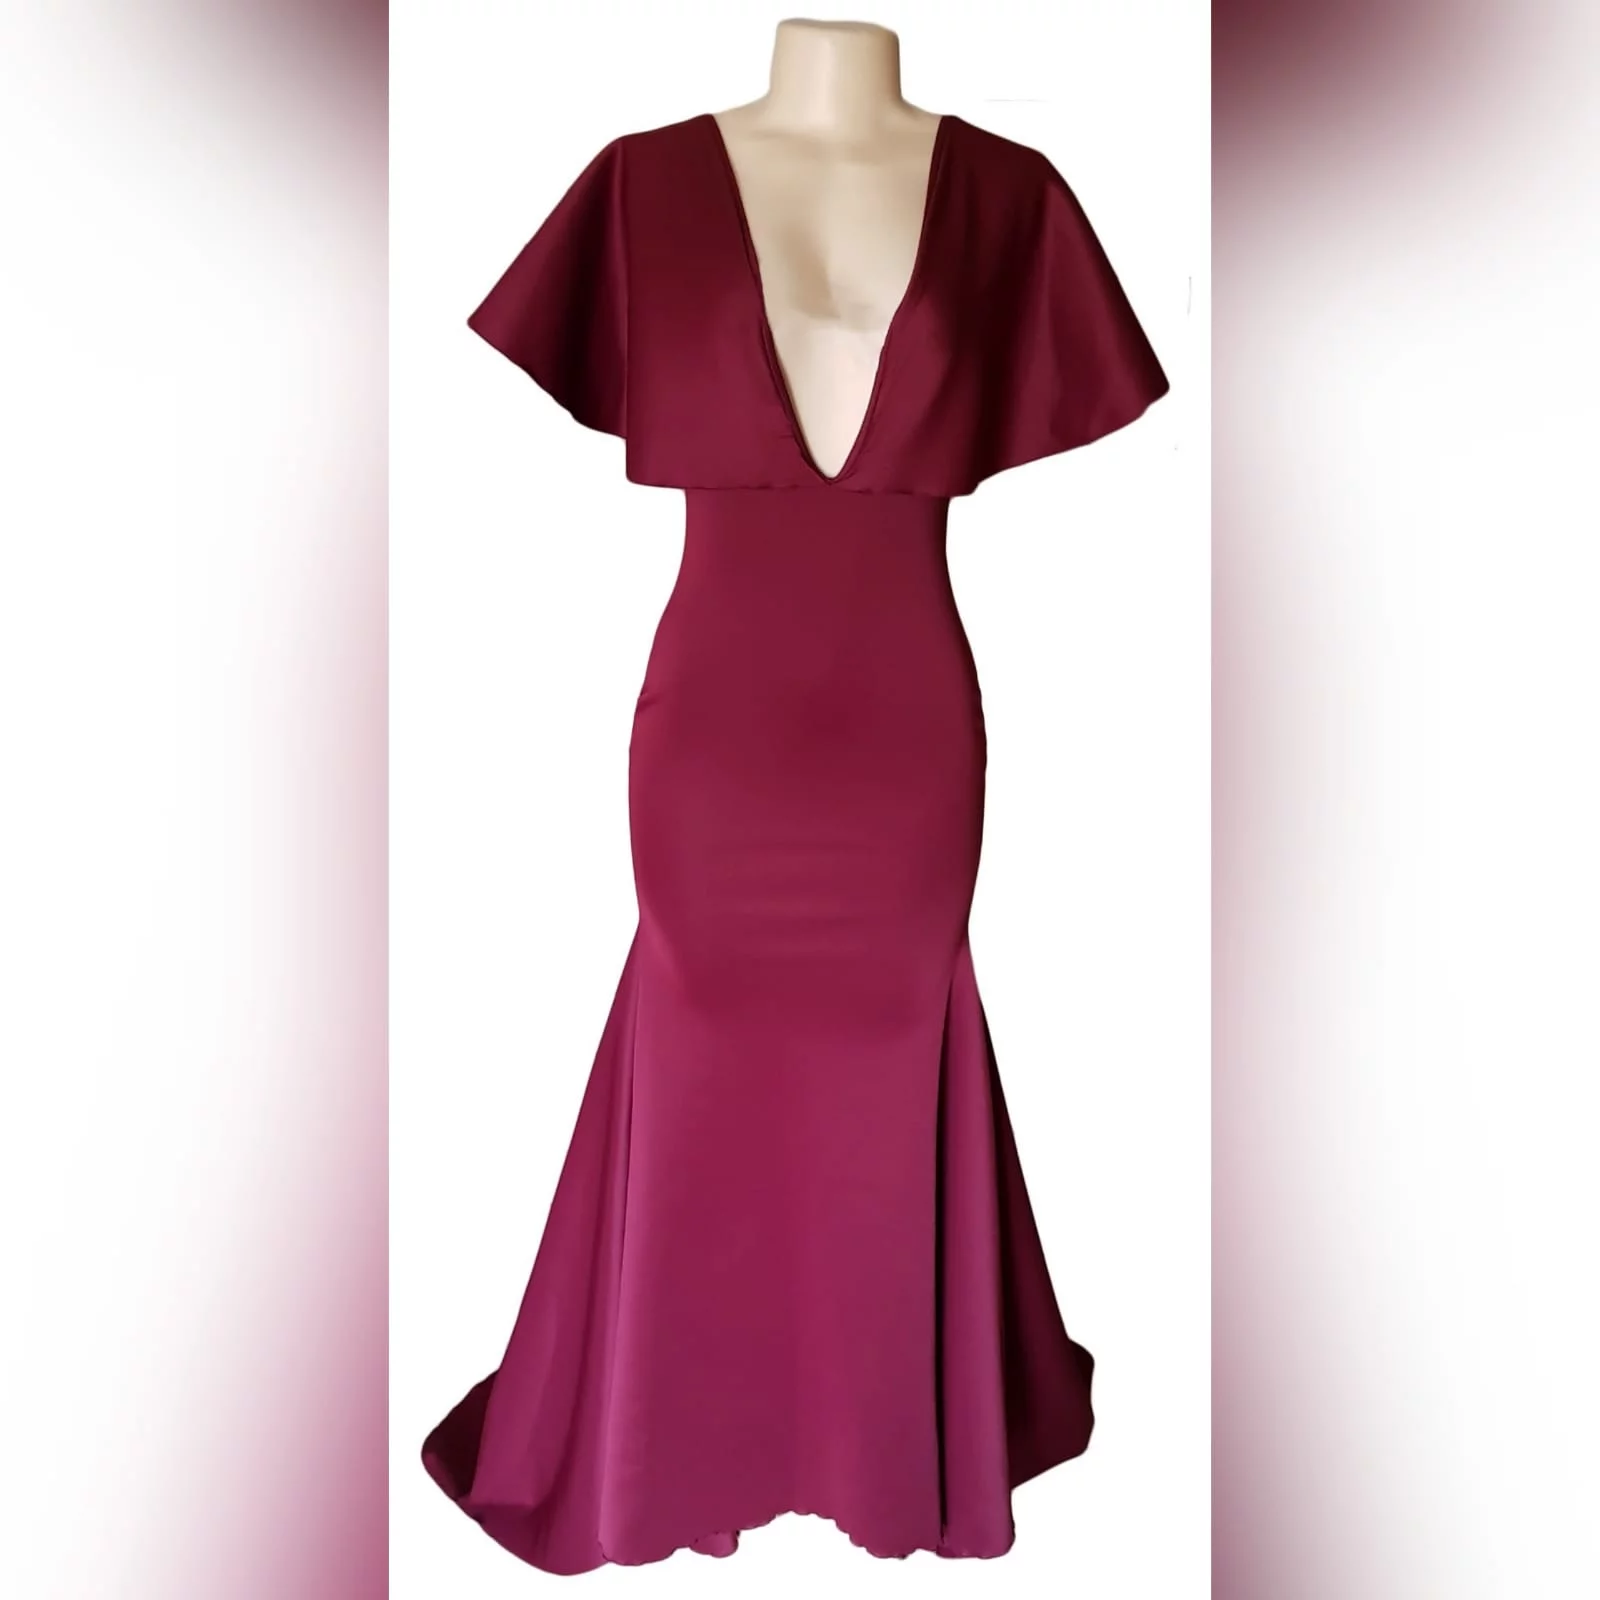 Burgundy plunging neckline soft mermaid matric dress 5 burgundy plunging neckline soft mermaid matric dress with flare short sleeves. Backless effect and a train.